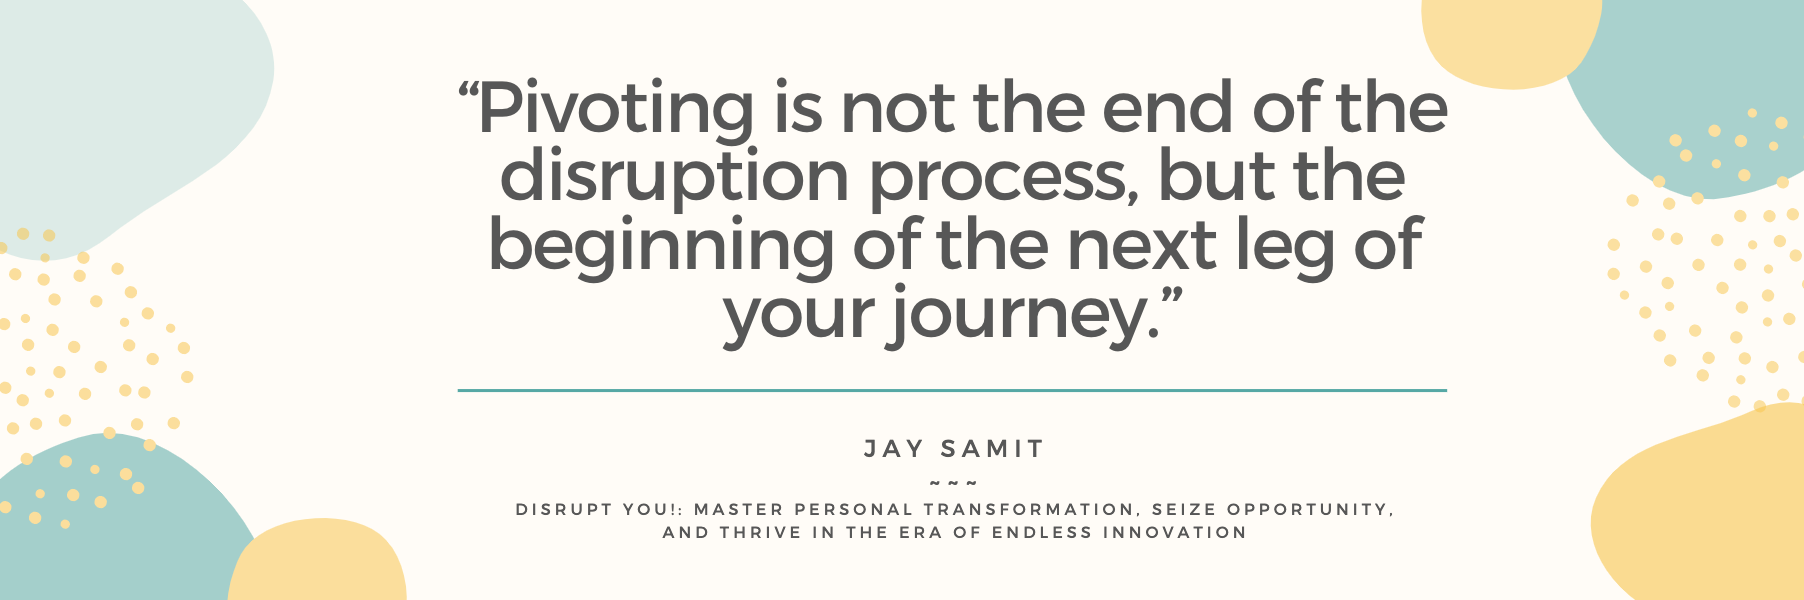 Quote from Jay Samit